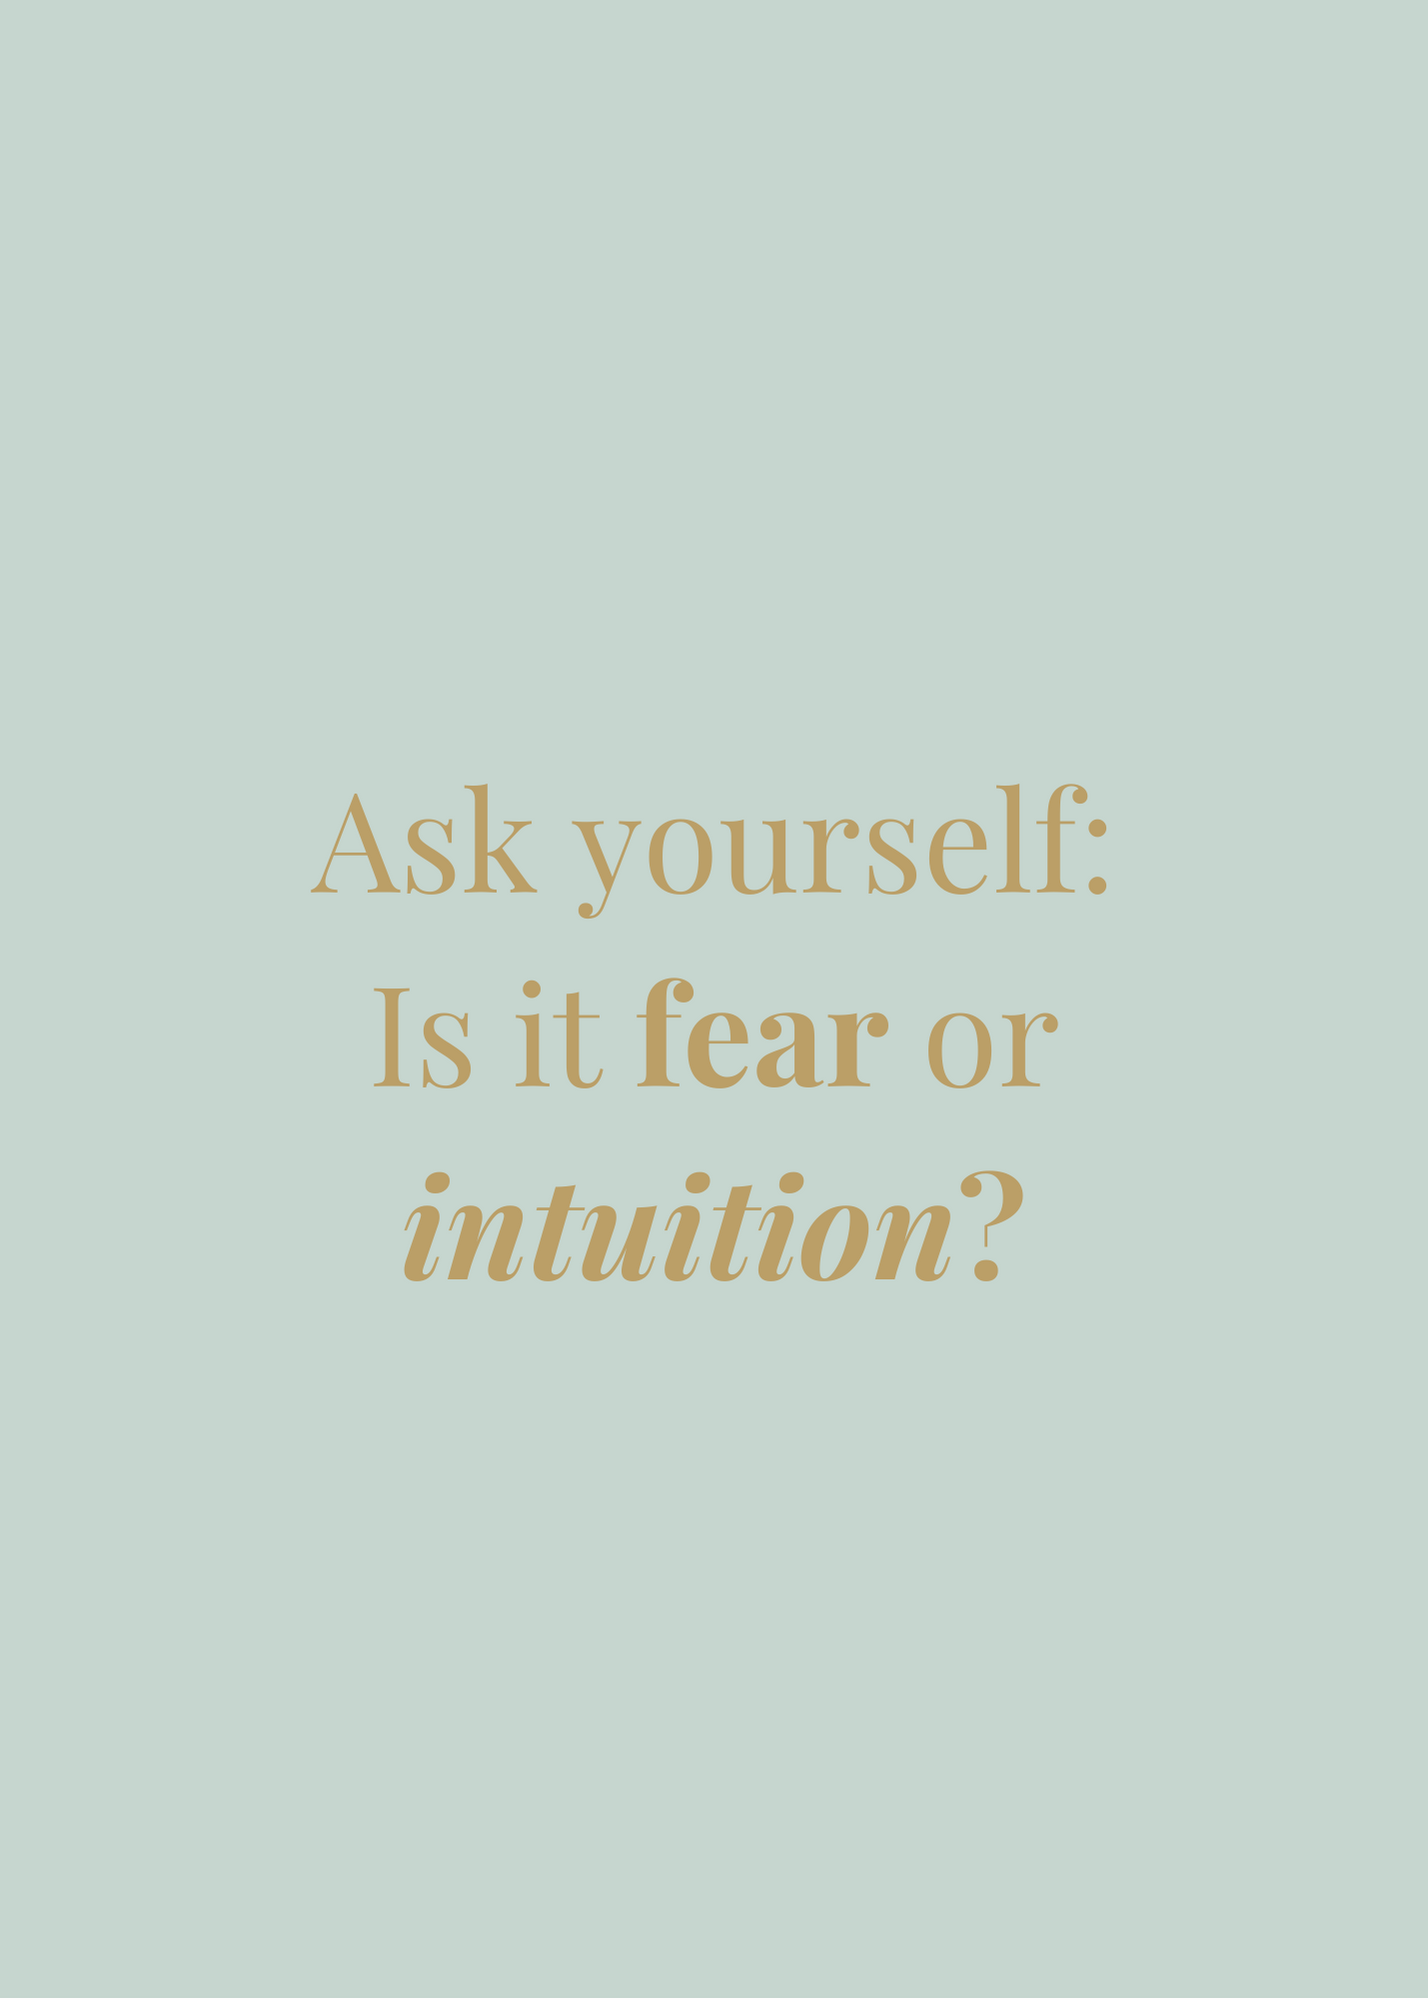 Ask yourself, is it fear or intuition? - a message for defined spleens